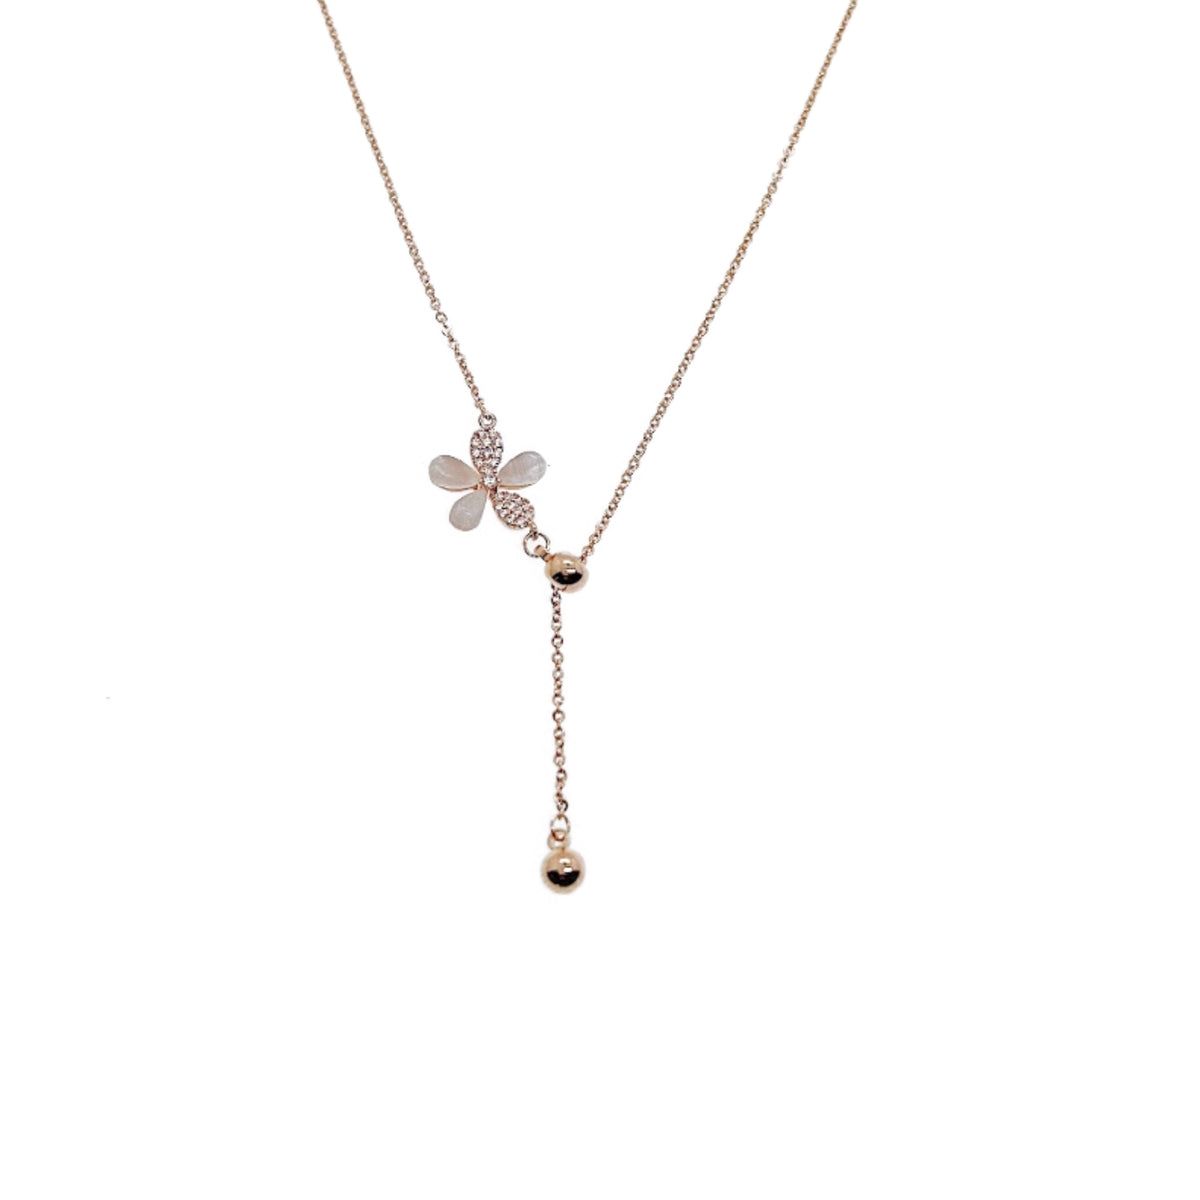 Flower Simulated Moonstone Necklace - CHOMEL